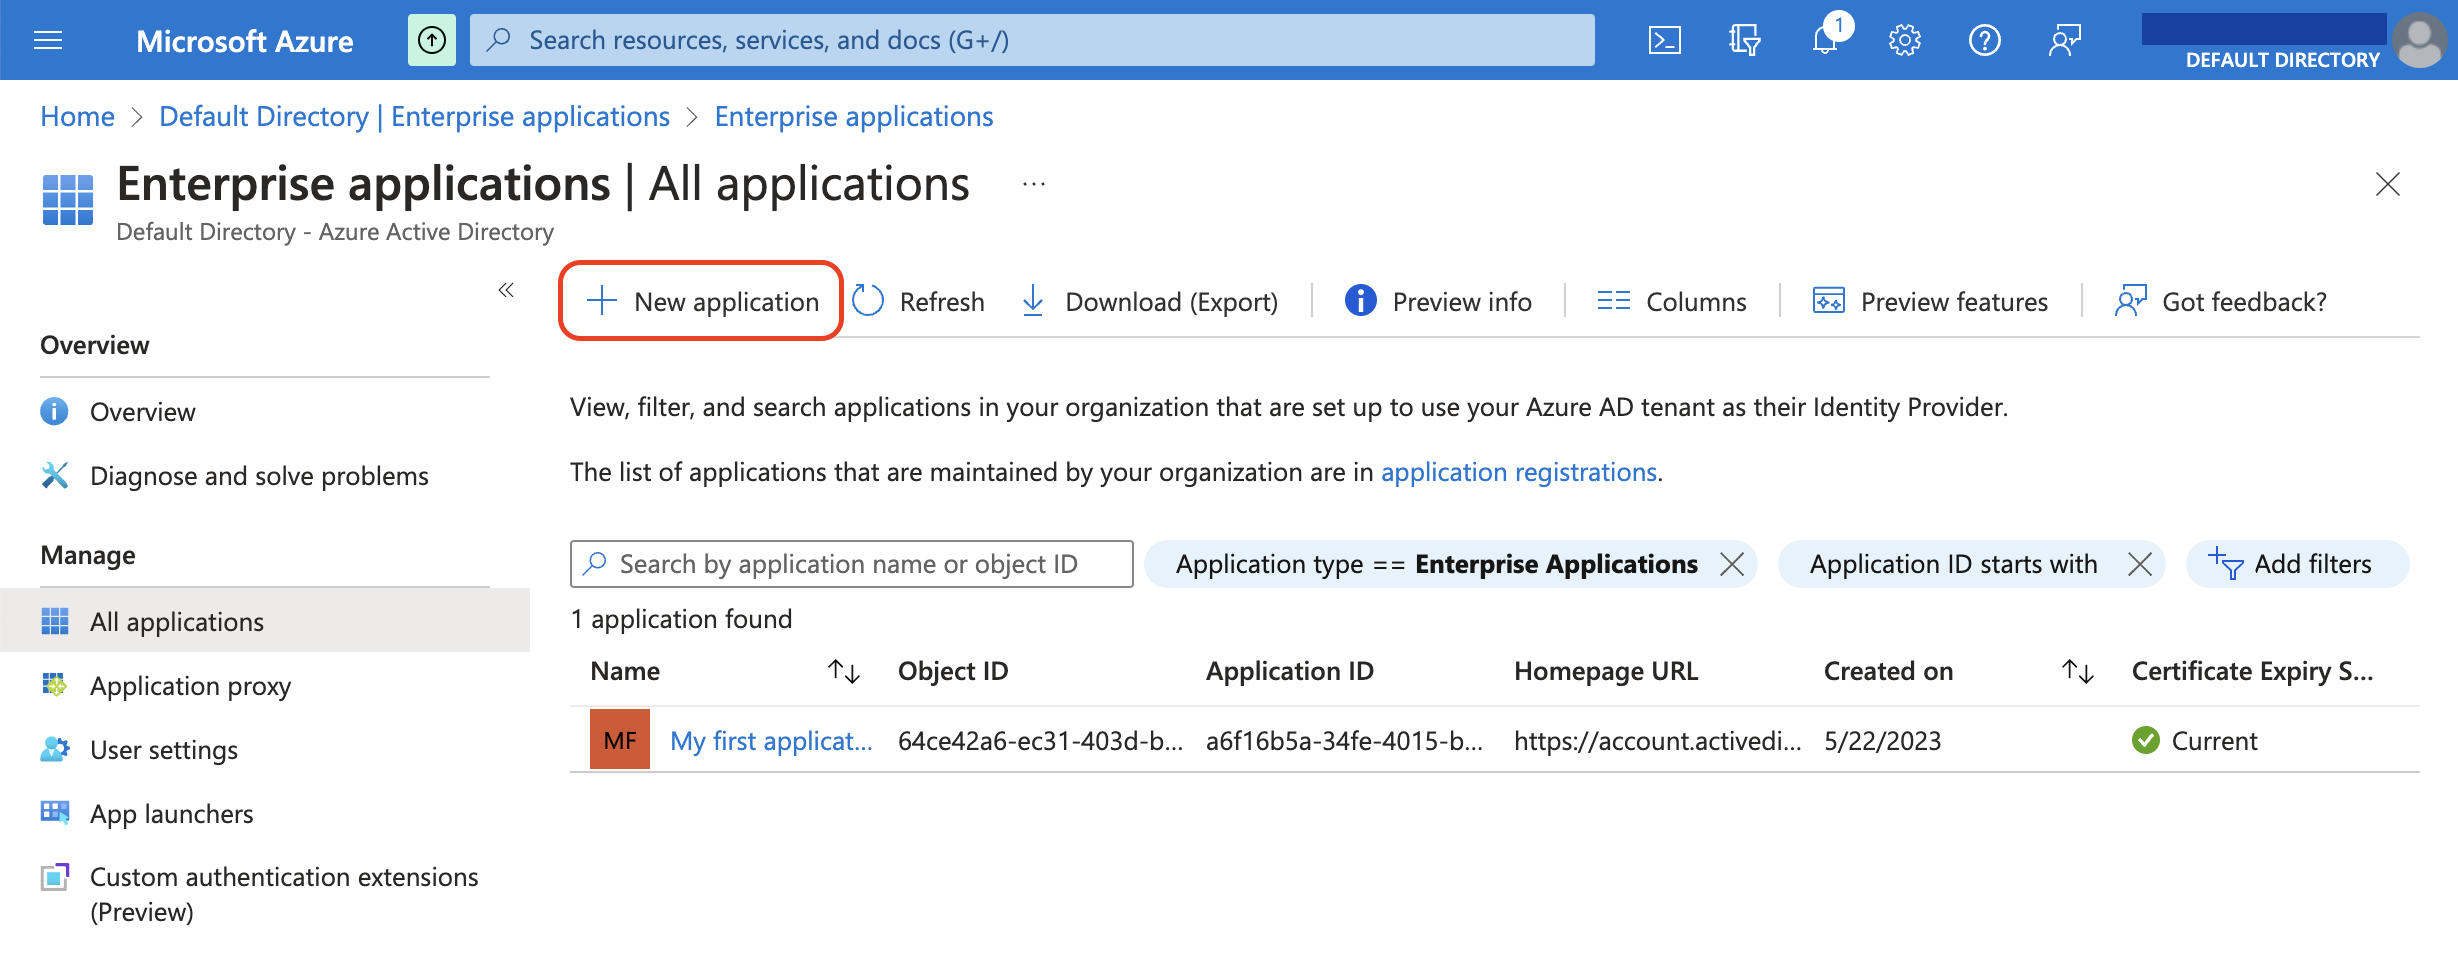 New application button in Azure